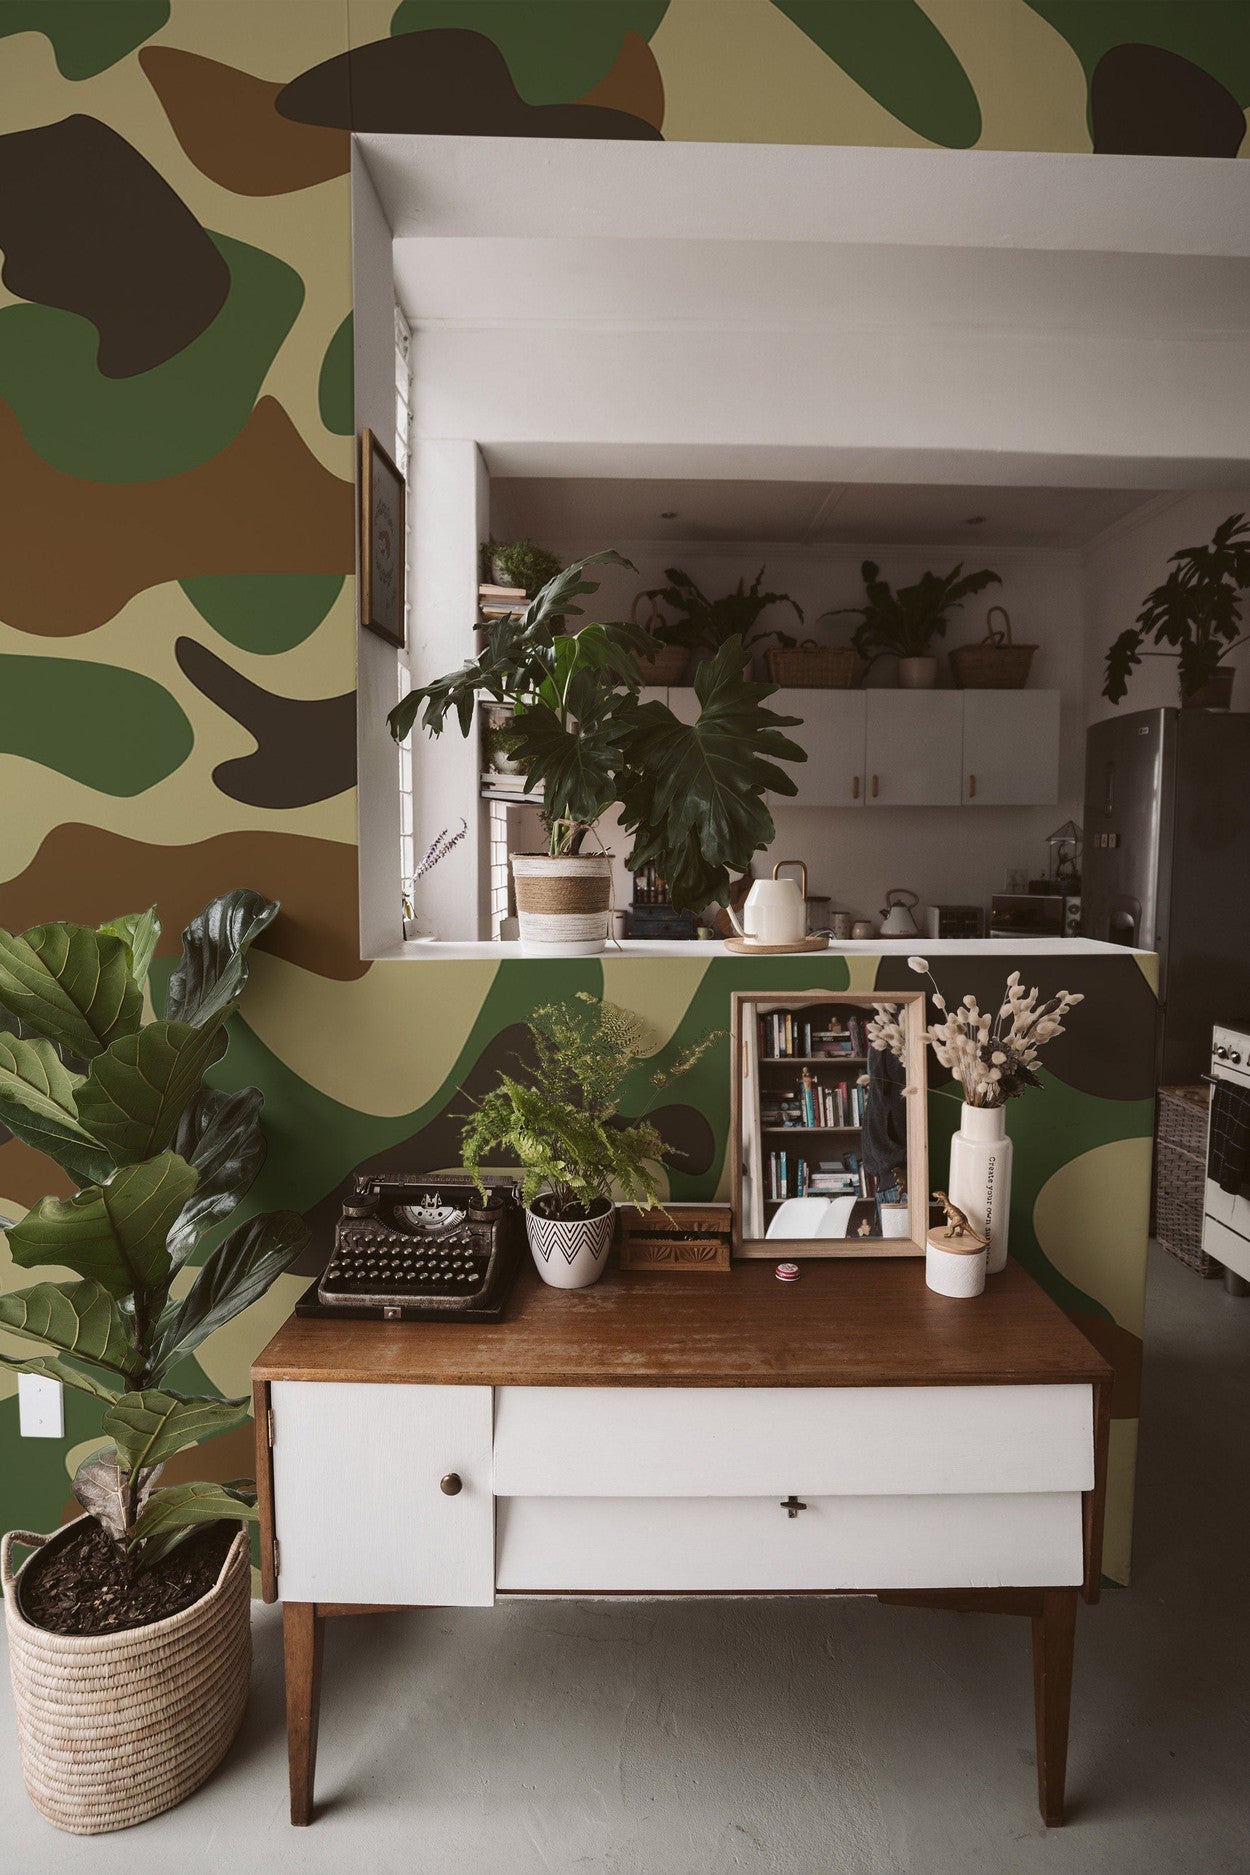 Stylish home office interior with a large camouflage pattern wall mural, vintage wooden desk, and decorative plants